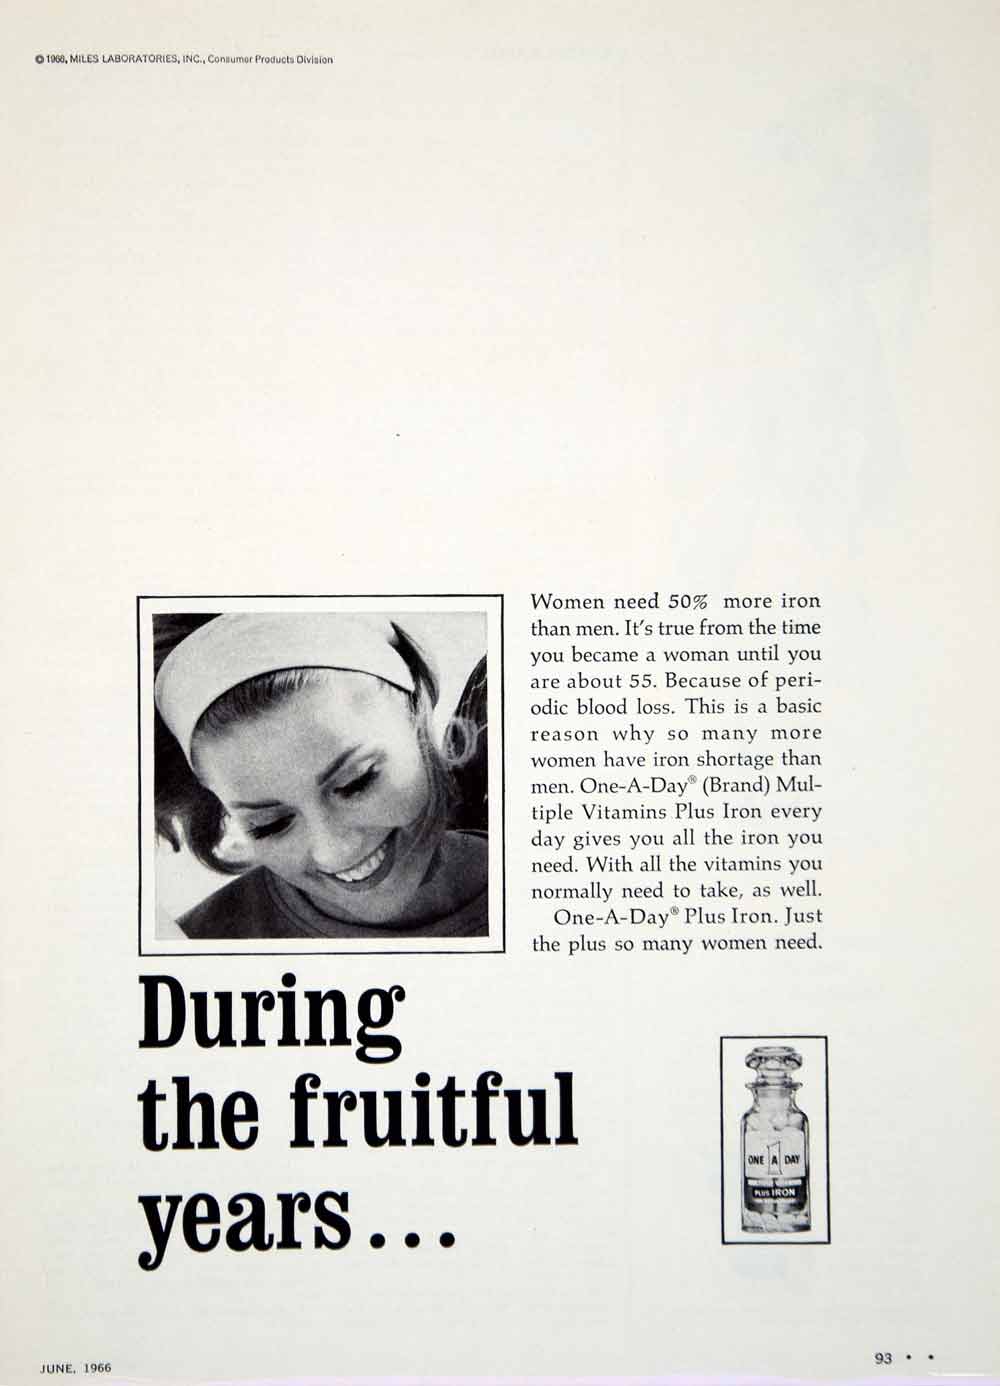 1966 Ad One-A-Day Brand Multiple Vitamins Plus Iron Women Health Supplement YWD2